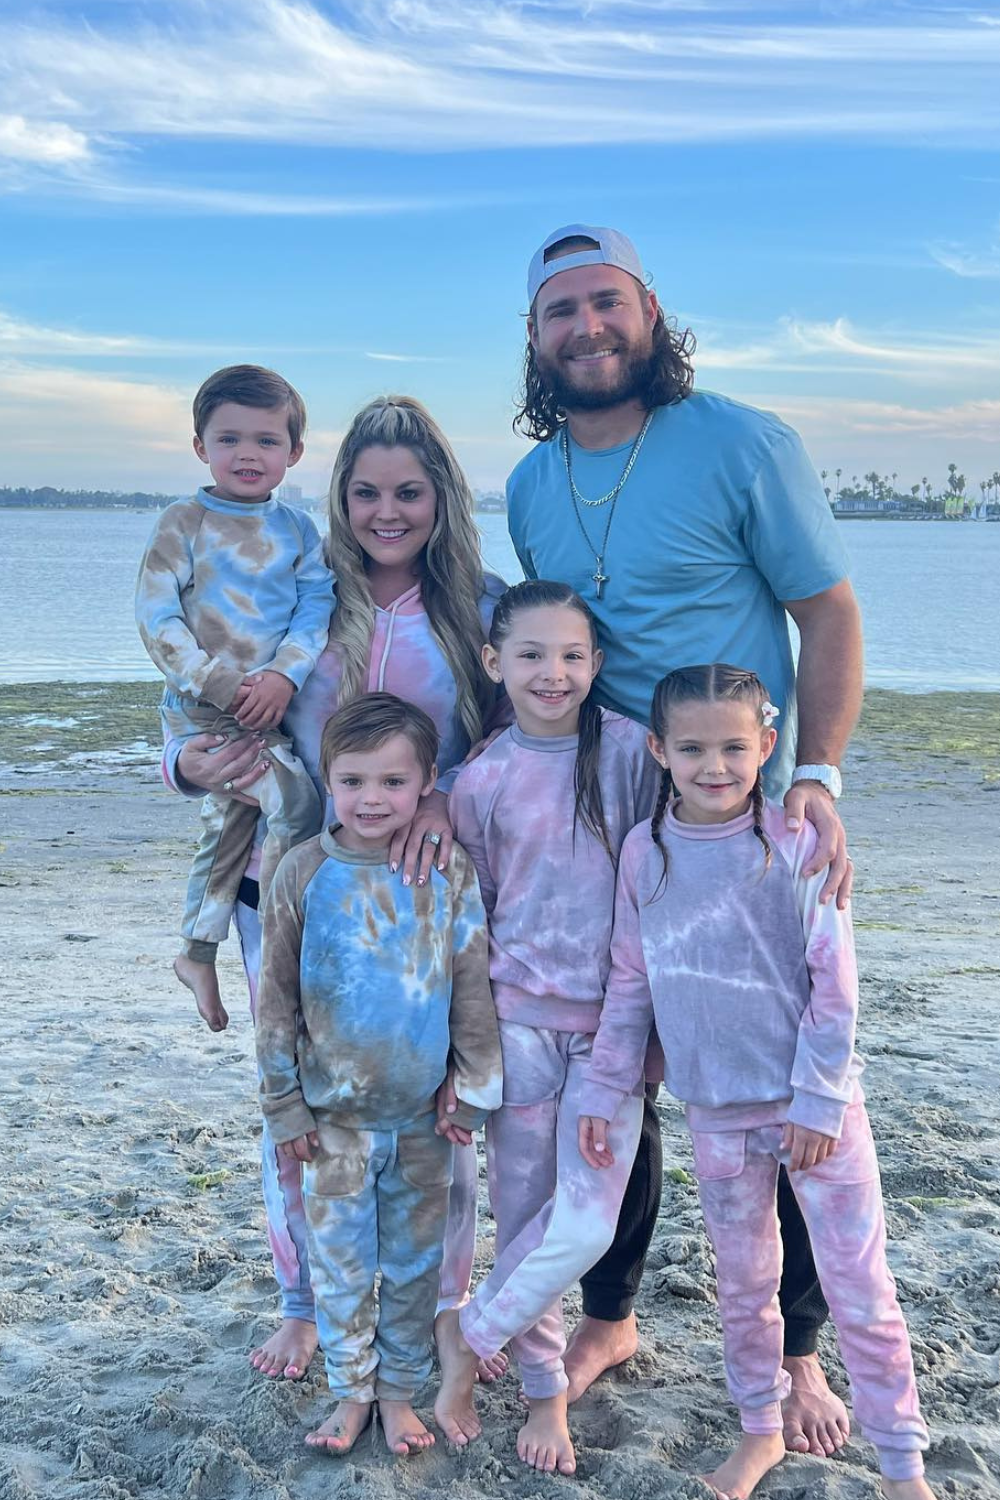 Brandon Crawford Out With His Wife And Kids